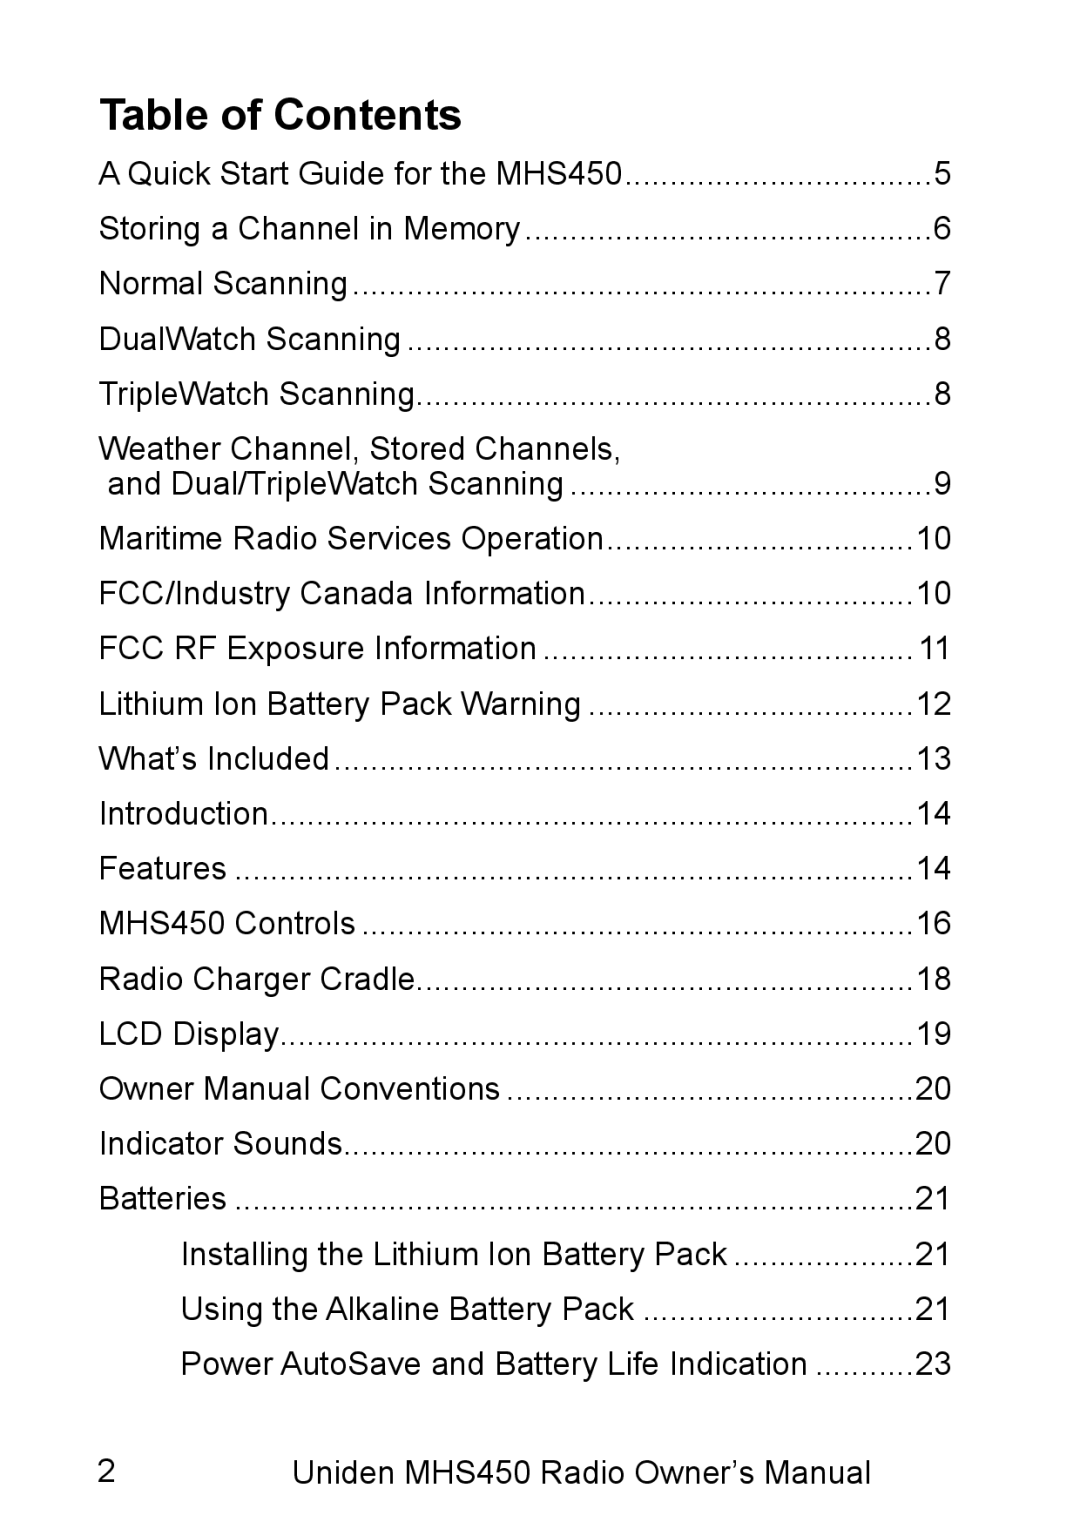 Uniden MHS450 owner manual Table of Contents 